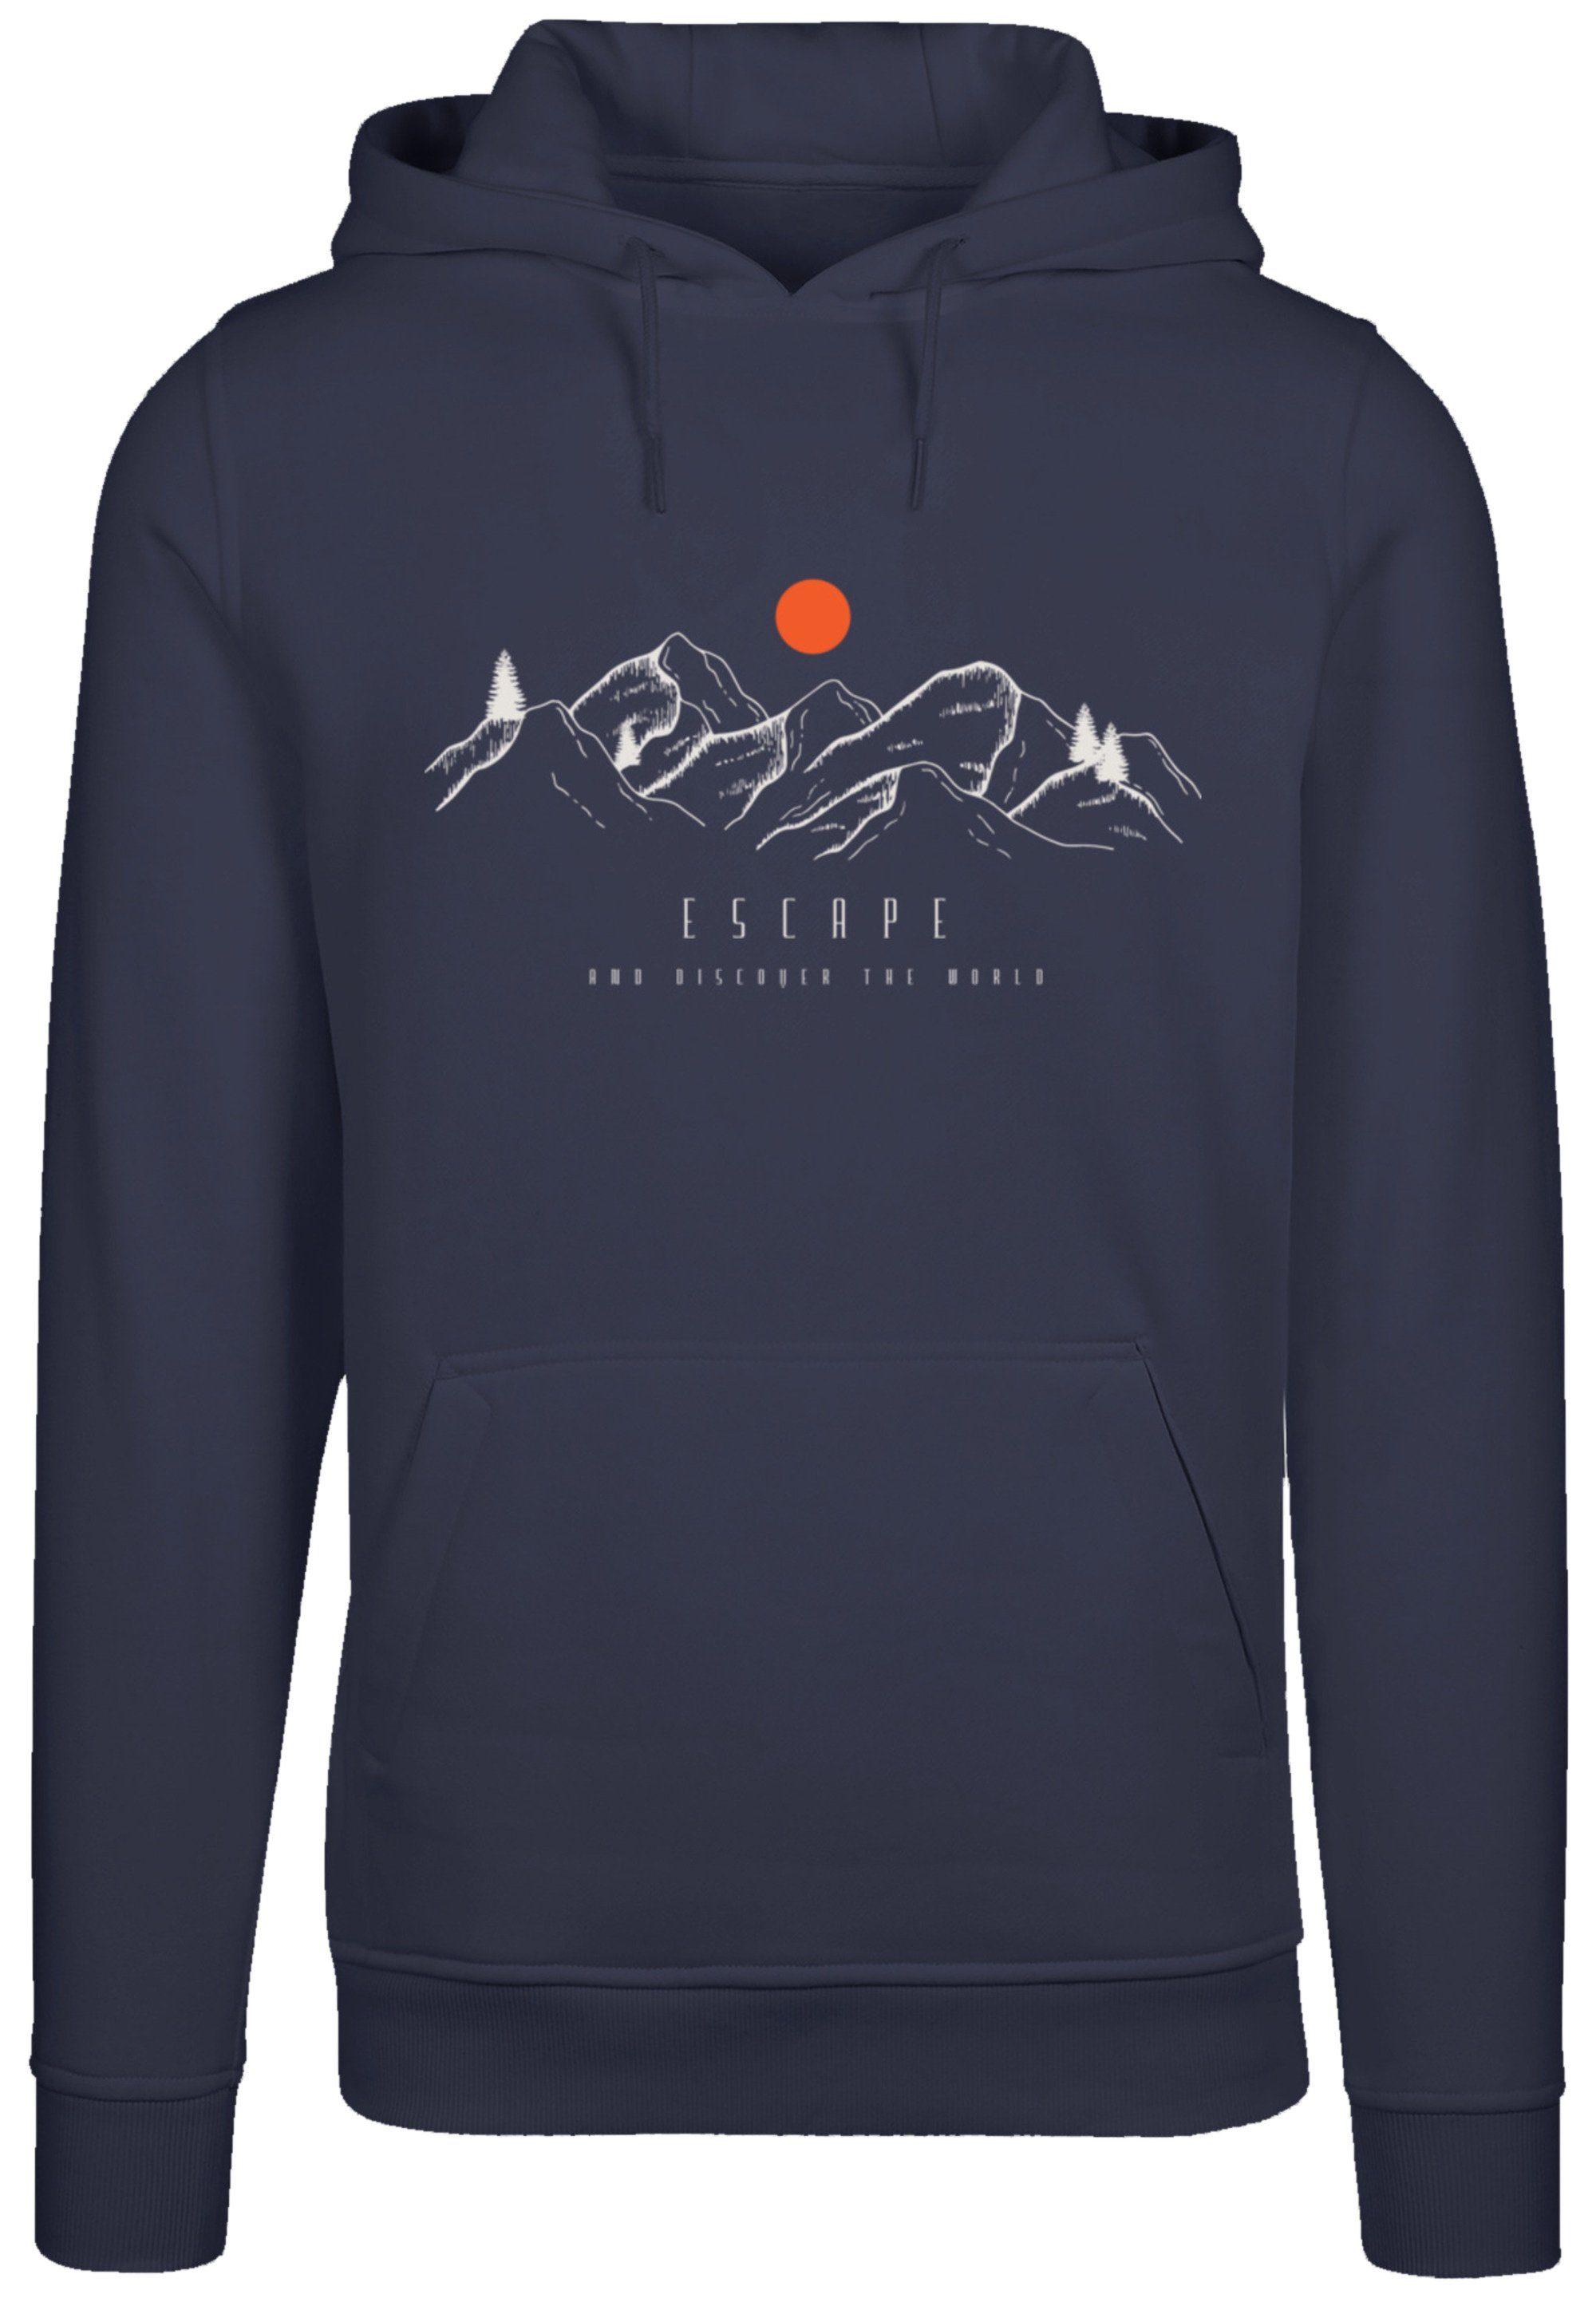 world Warm, Kapuzenpullover navy F4NT4STIC Discover Bequem the Hoodie,